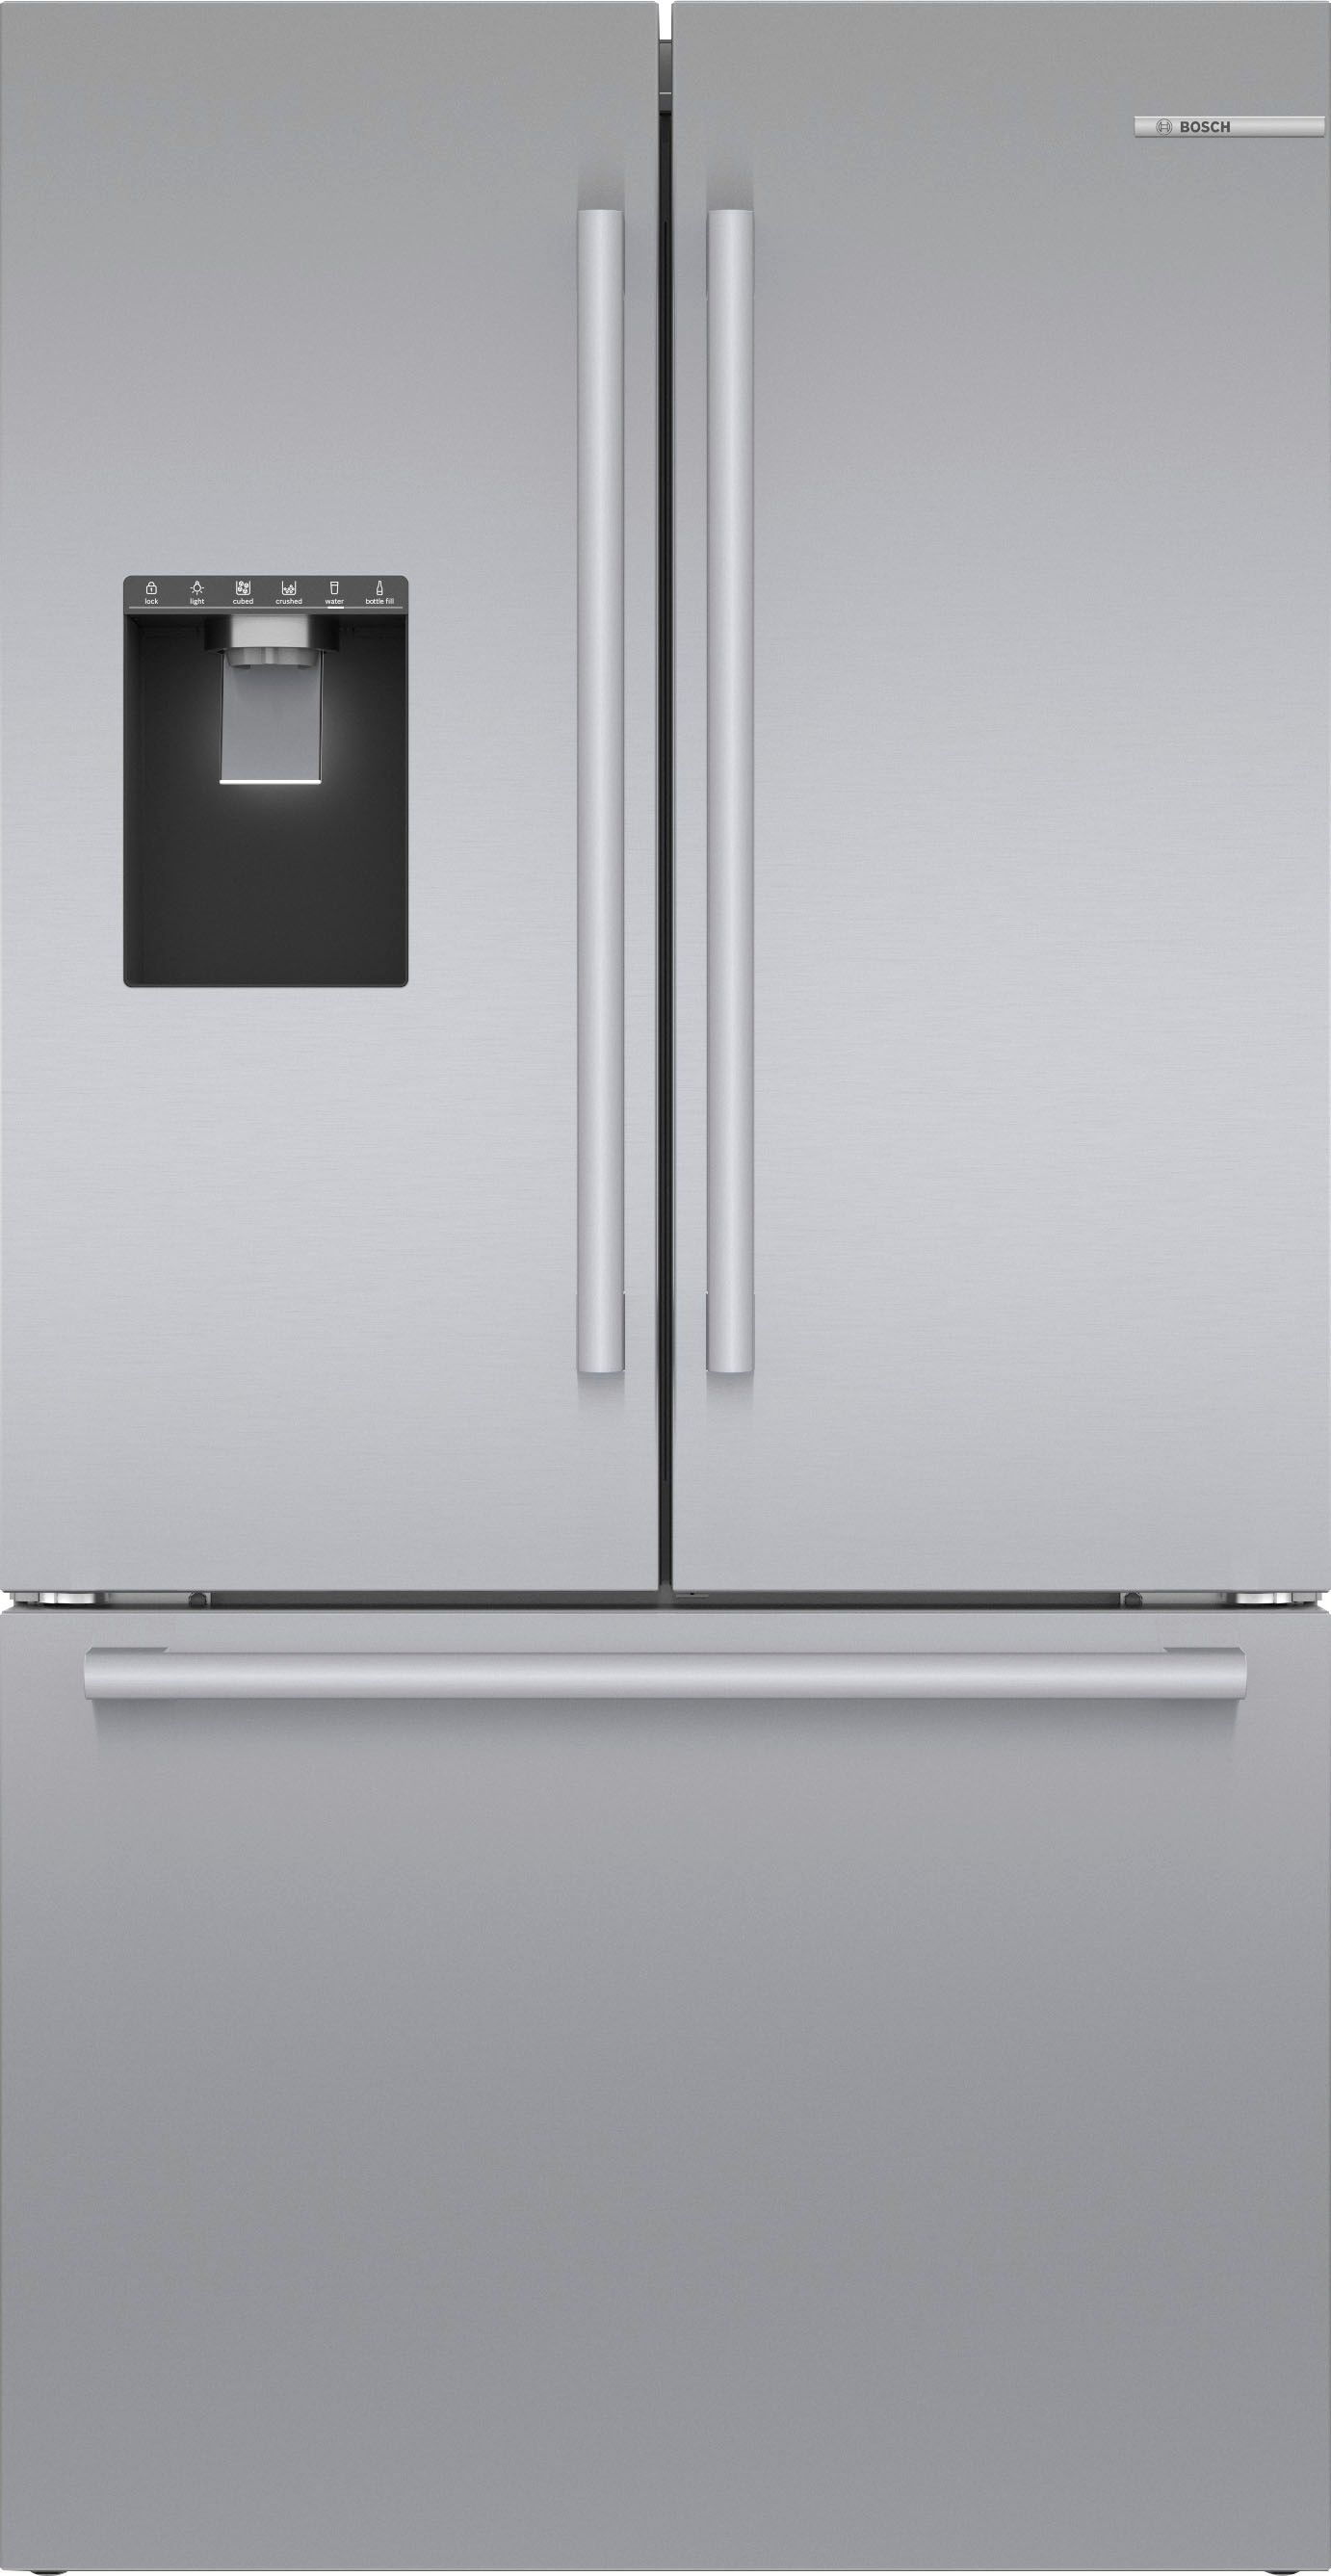 Bosch - 500 Series 26 Cu. Ft. French Door Smart Refrigerator with QuickIcePro - Stainless Steel